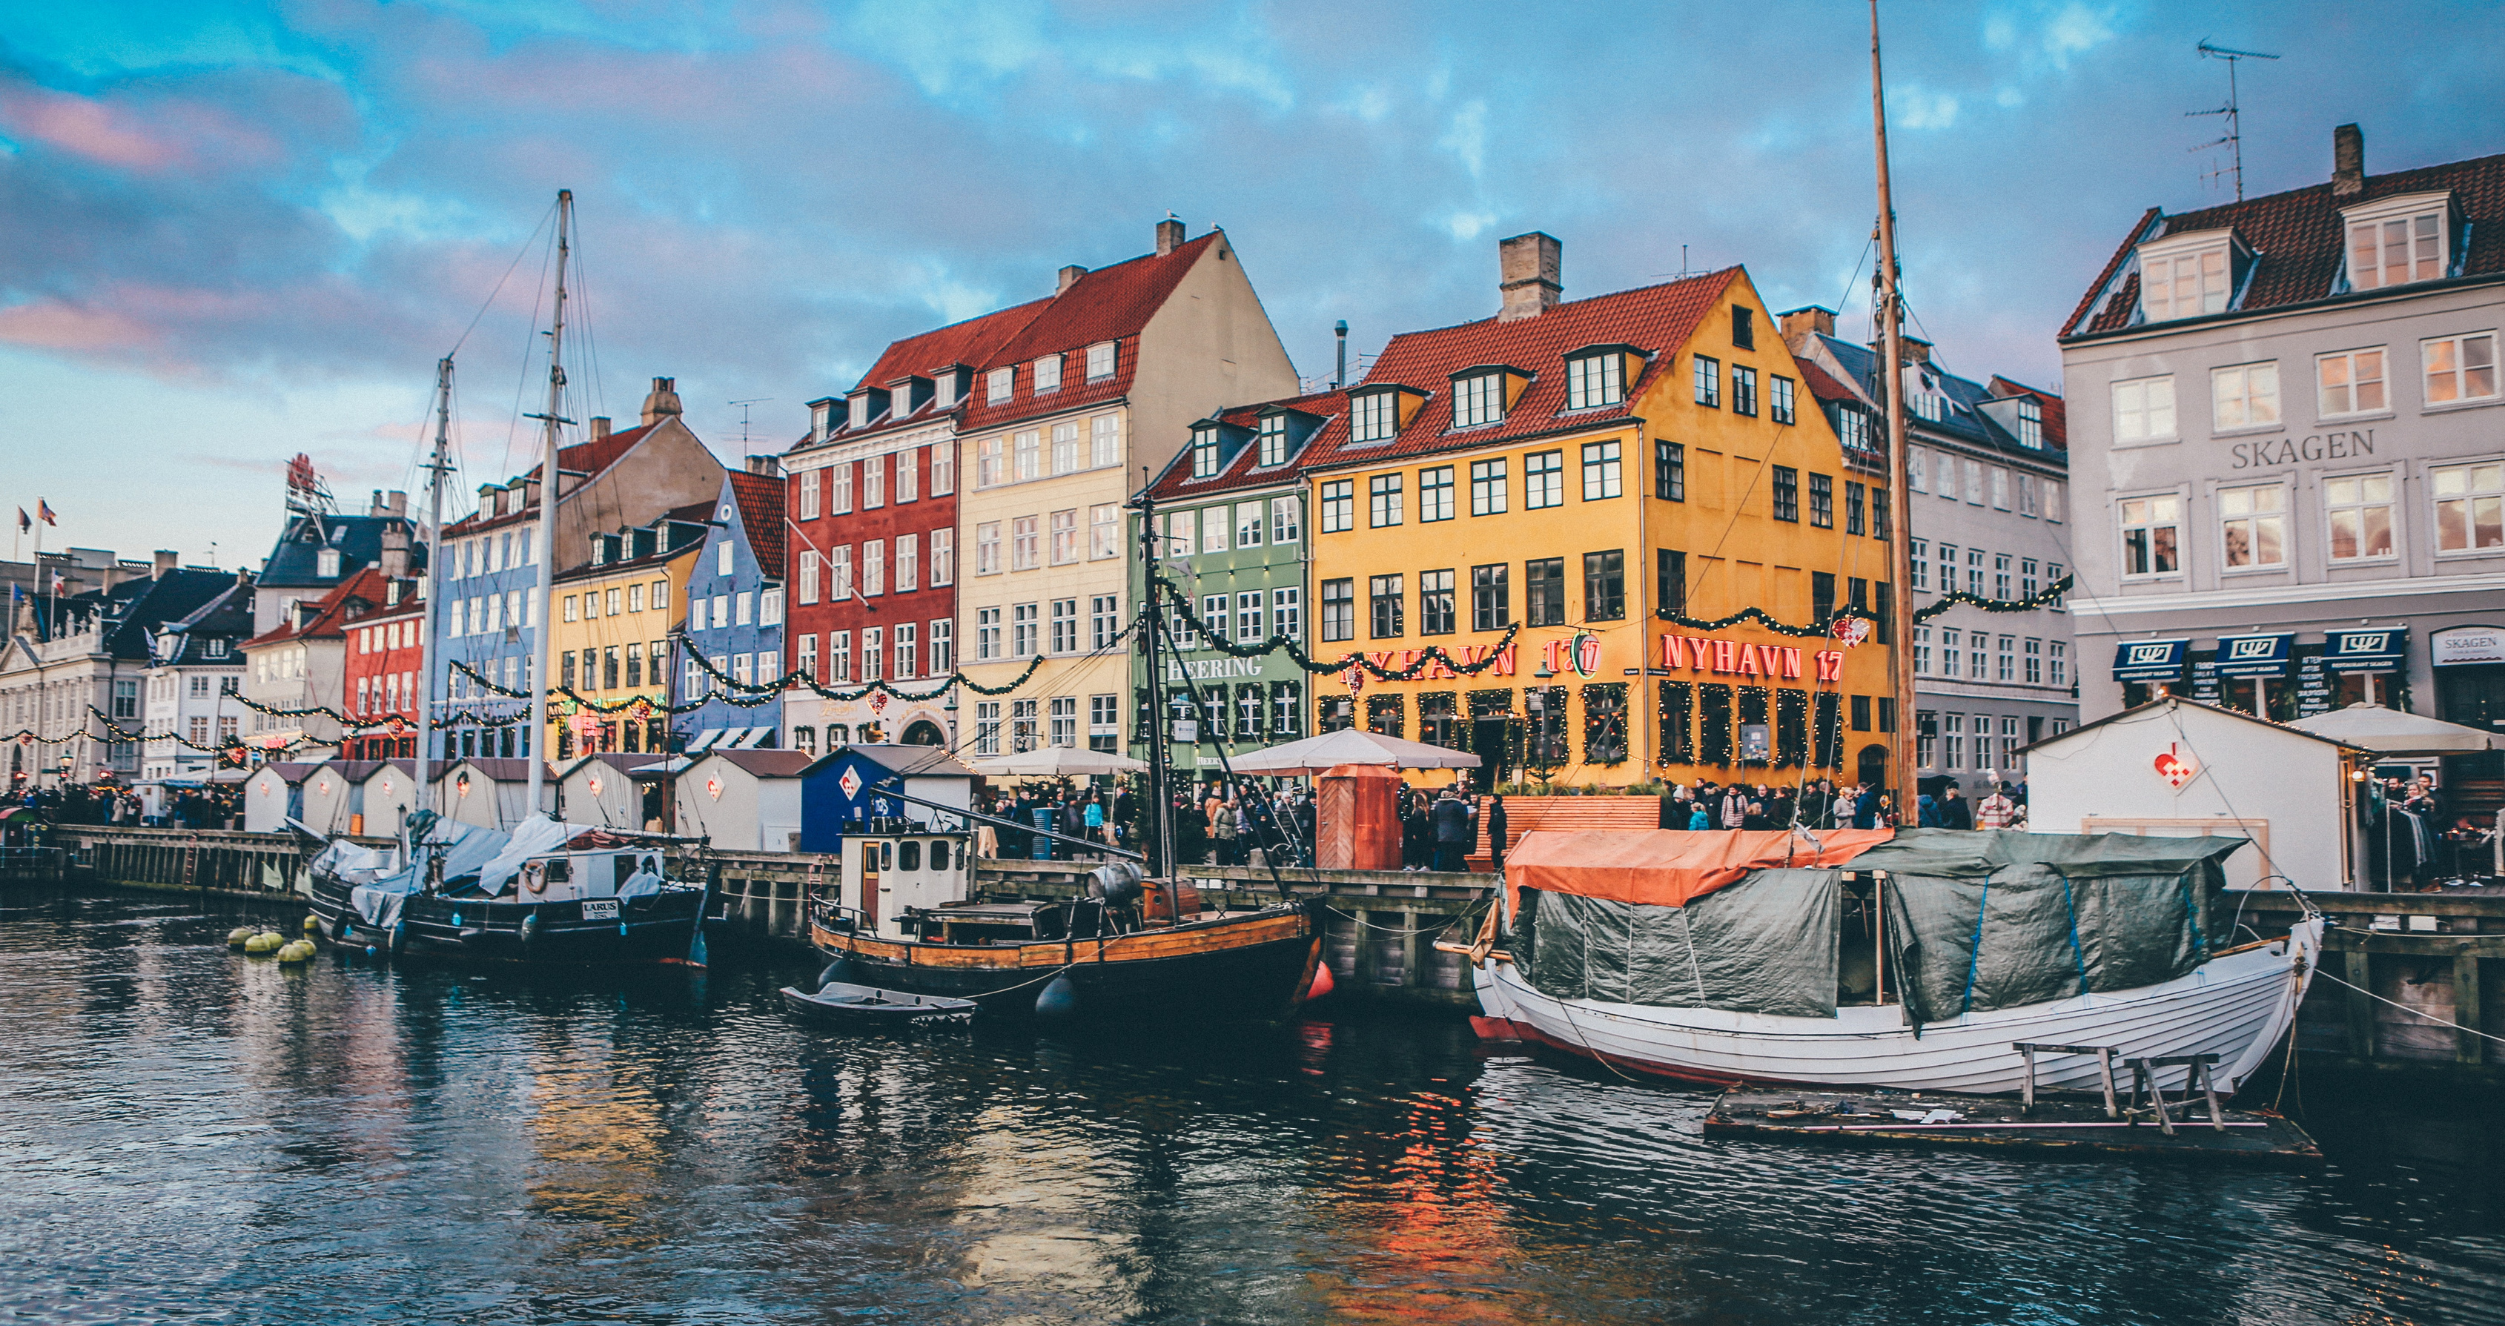 Buildings and boats line a channel in Copenhagen